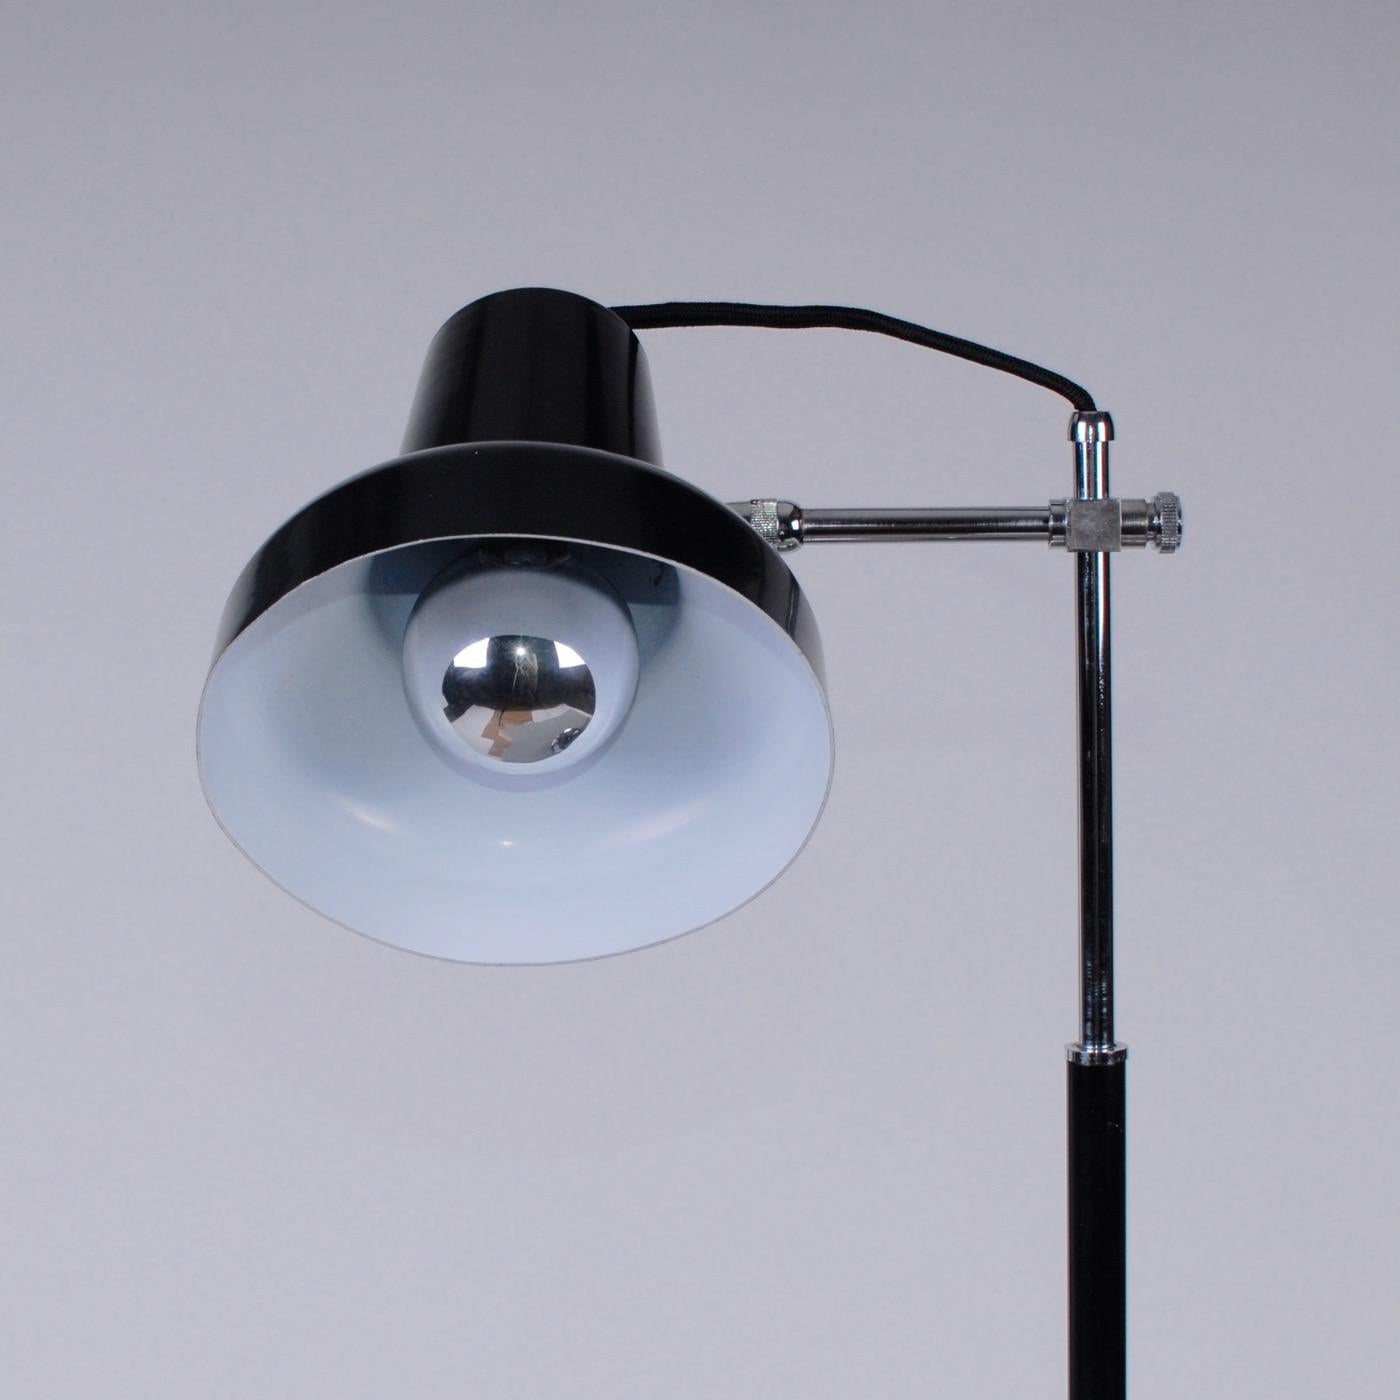 Mid-Century Modern 1950s black and chrome lacquered Italian desk lamp.
Chrome metal base with push switch black lacquer and chrome adjustable up and down rod, Aluminium black lacquered shade. Newly wired with fabric braided wire EU/US standard. E27